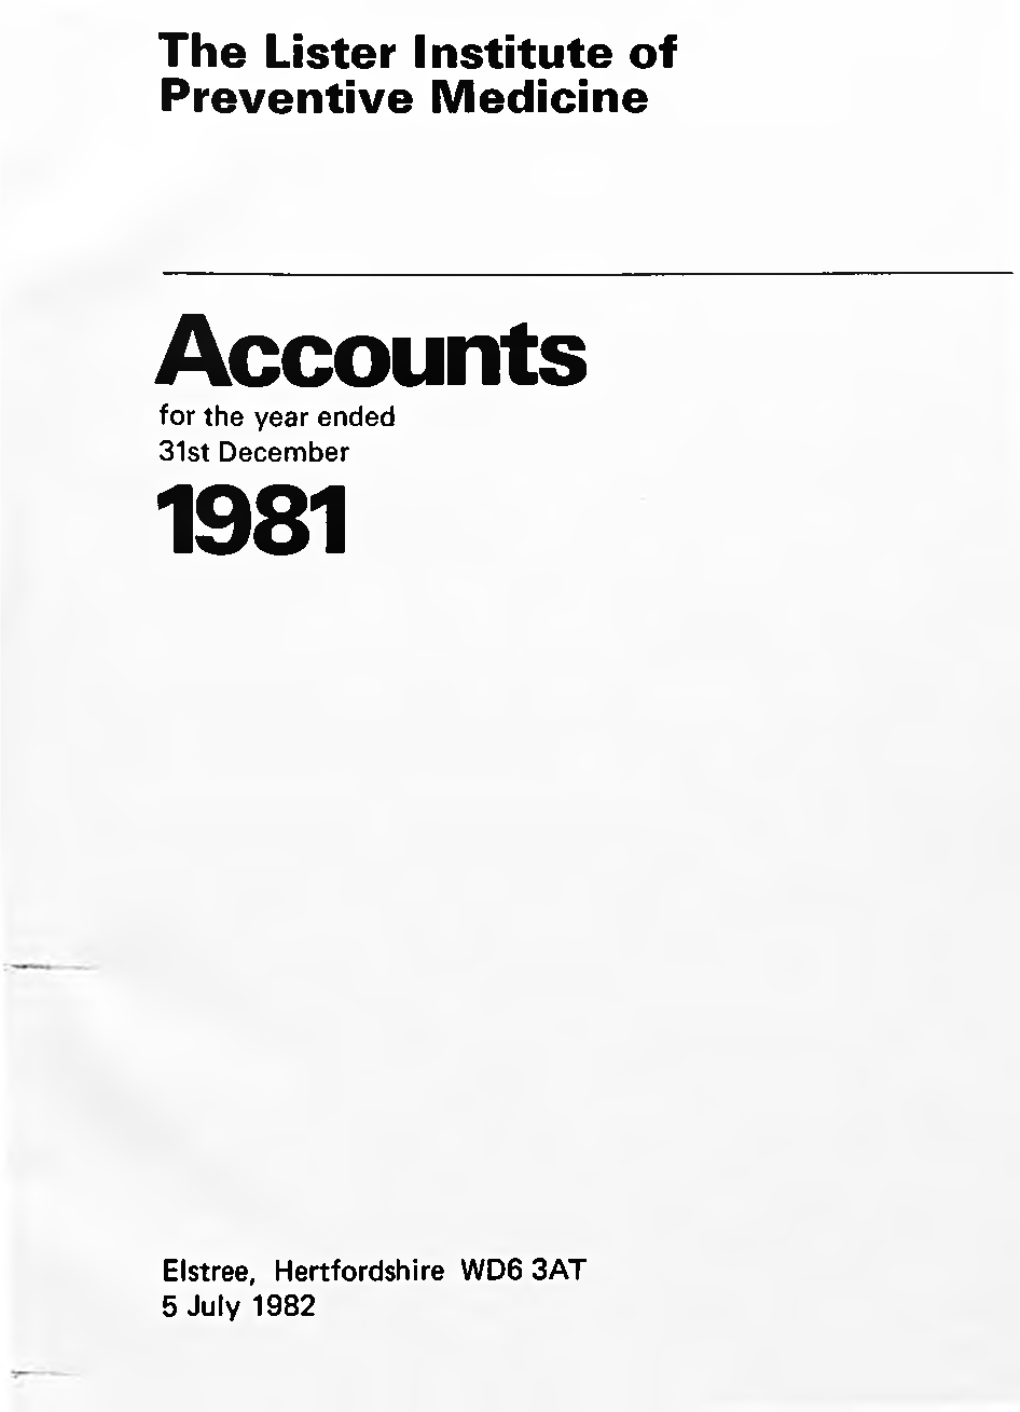 1981 to 1990 Lister Annual Report and Accounts